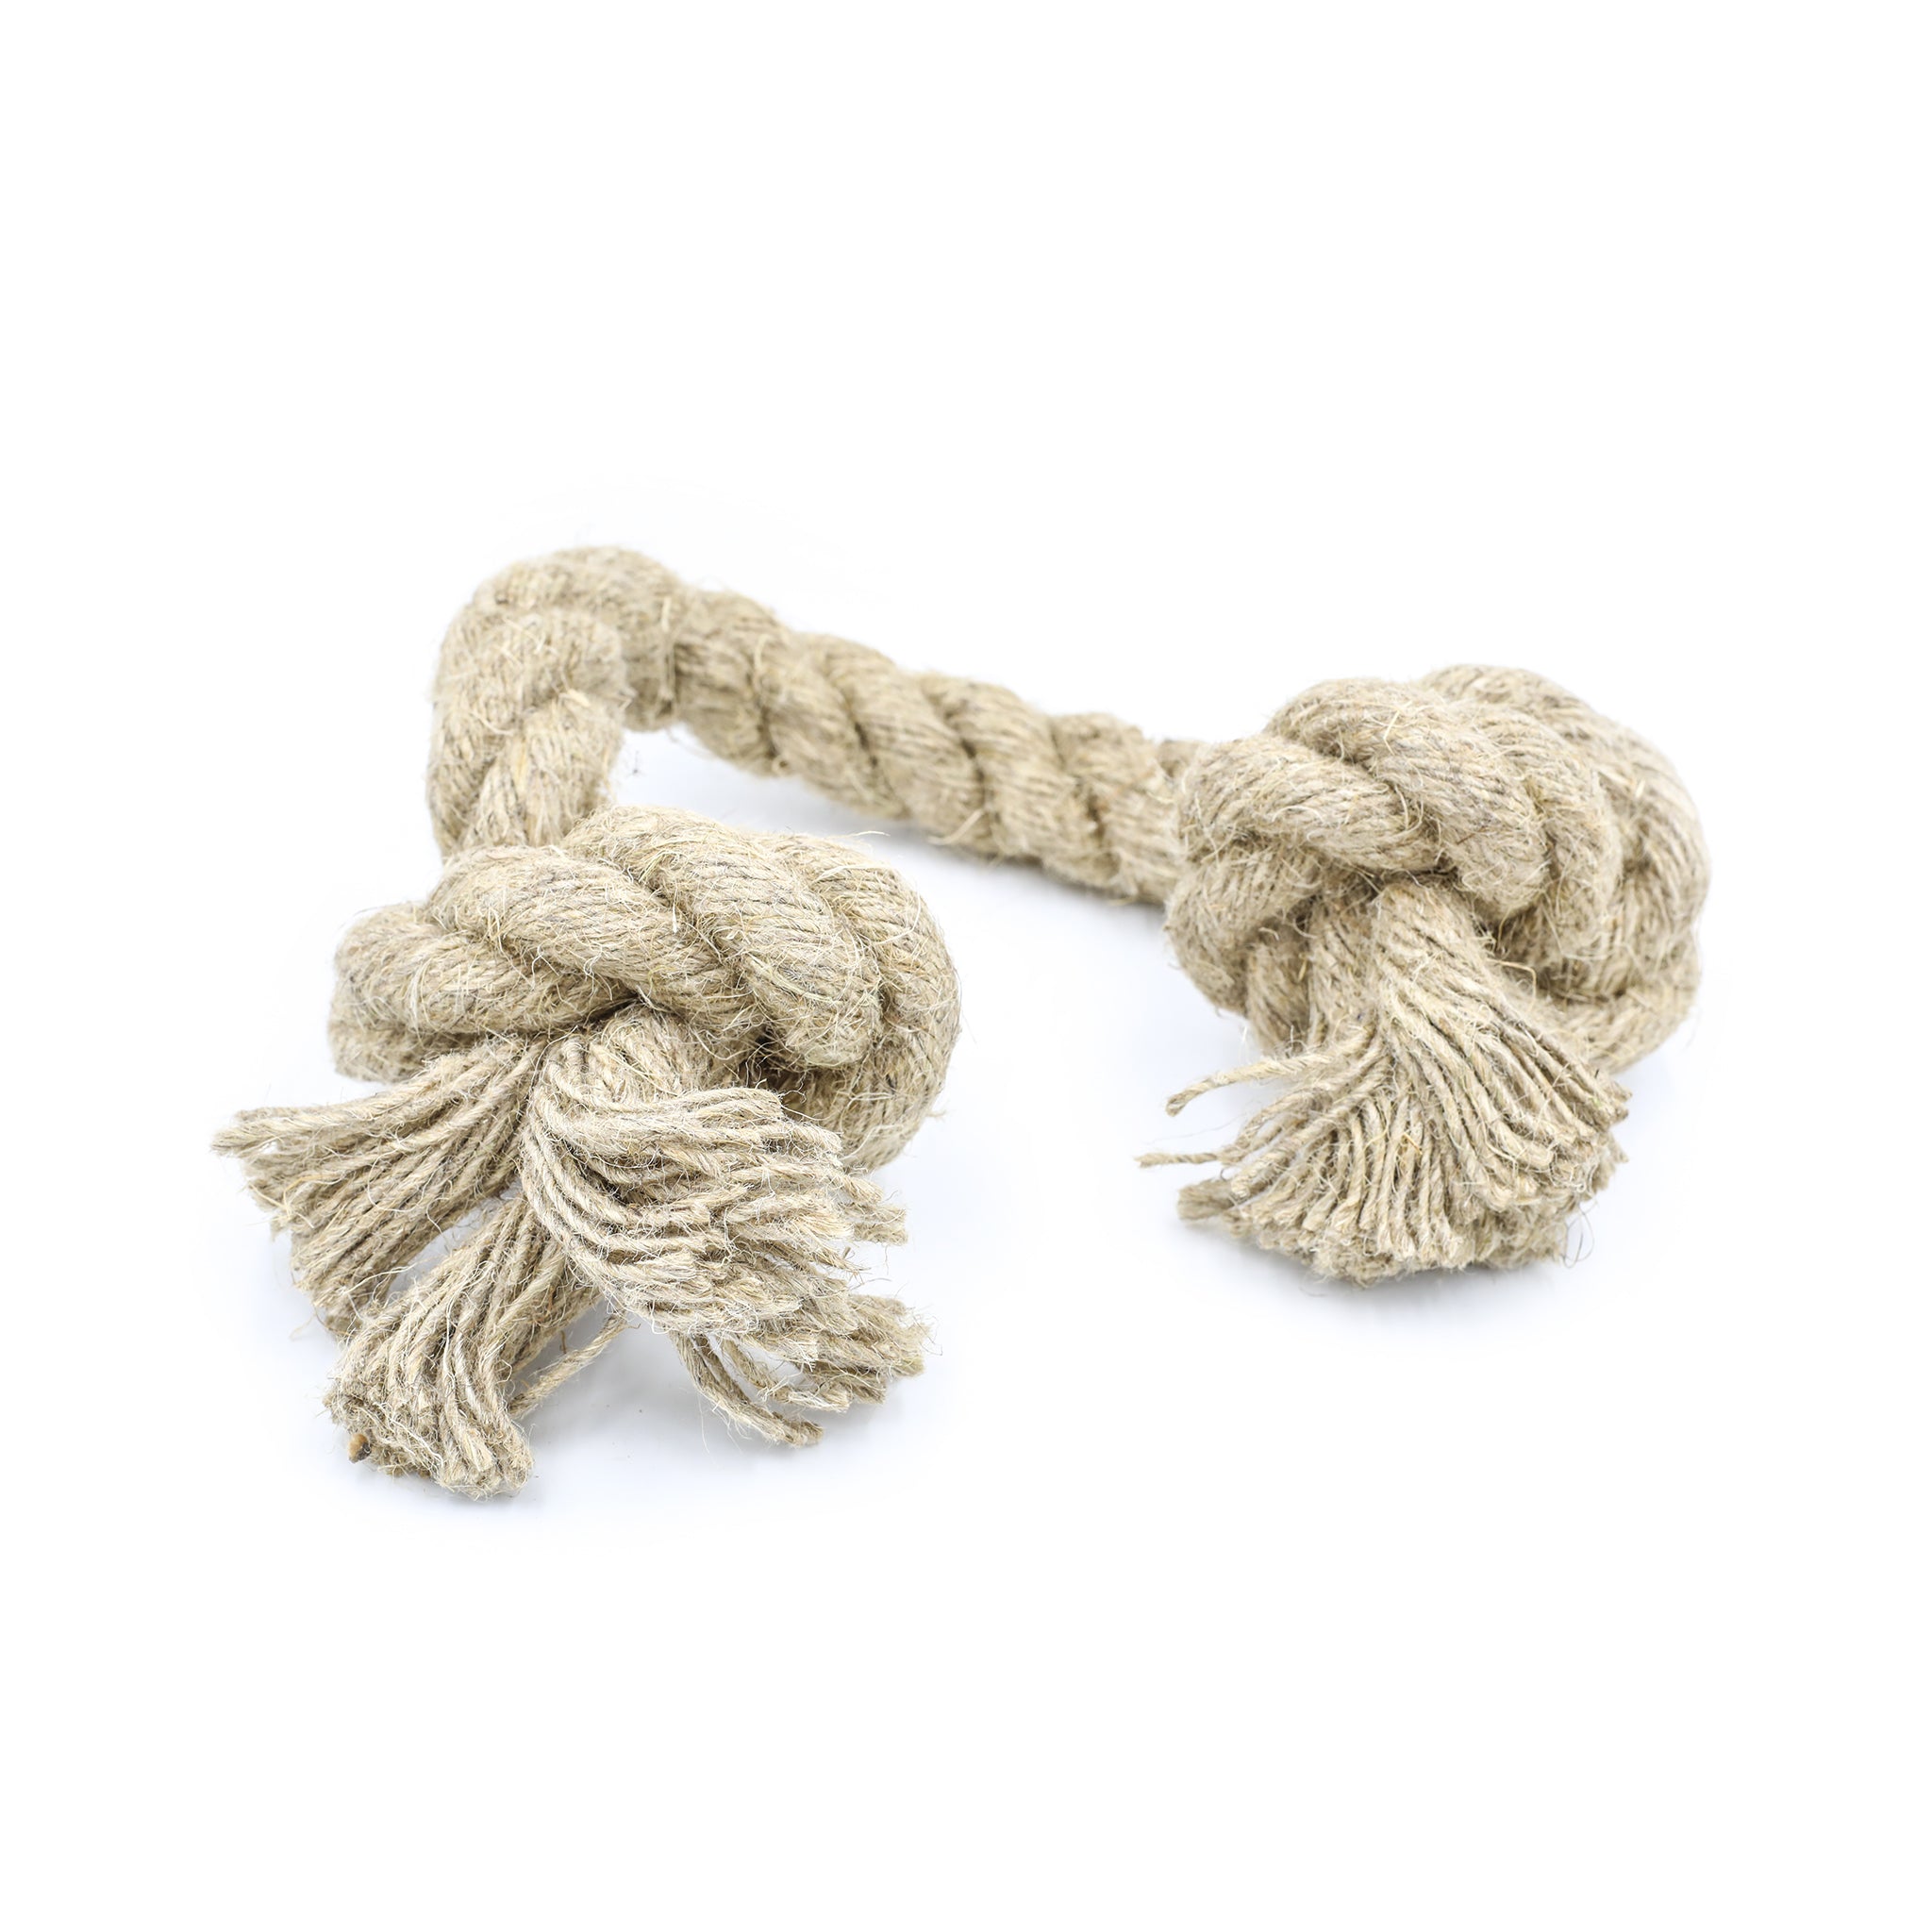 Large rope tug toy for dogs, made out of natural jute hemp material. The natural tug rope sits on a white background